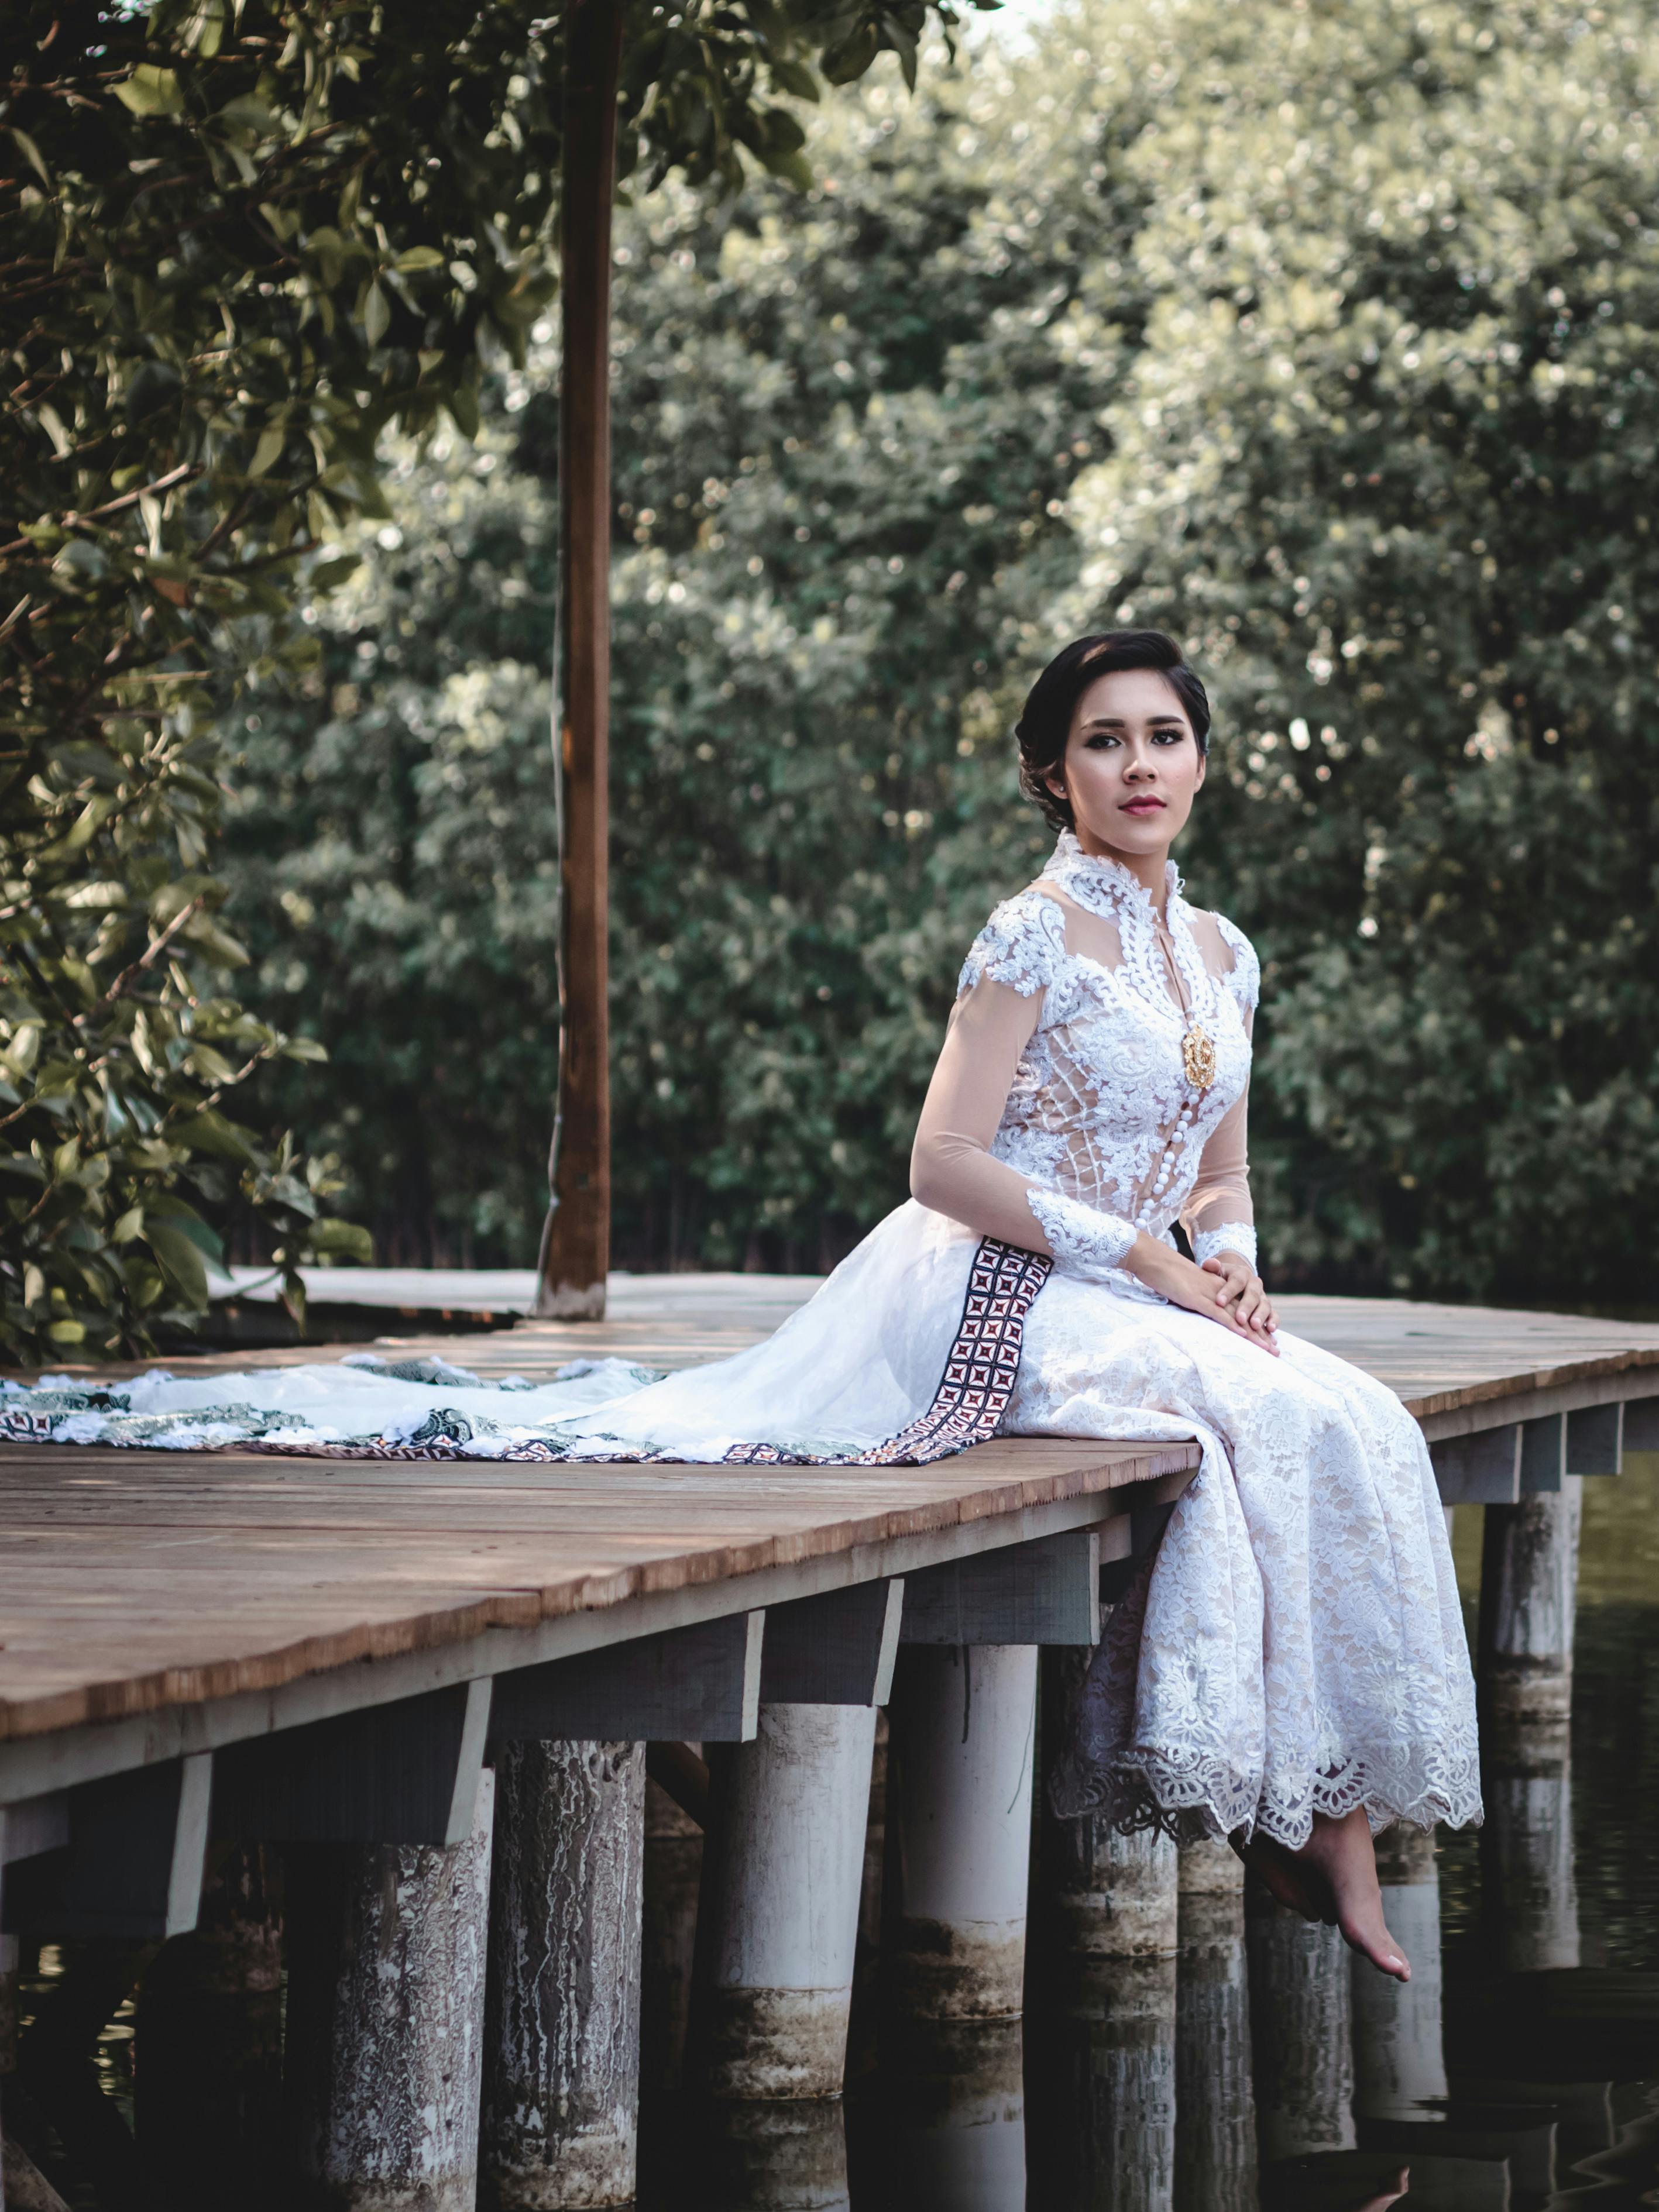 Woman in White Long Lace Dress Sitting on Wooden Dock · Free Stock